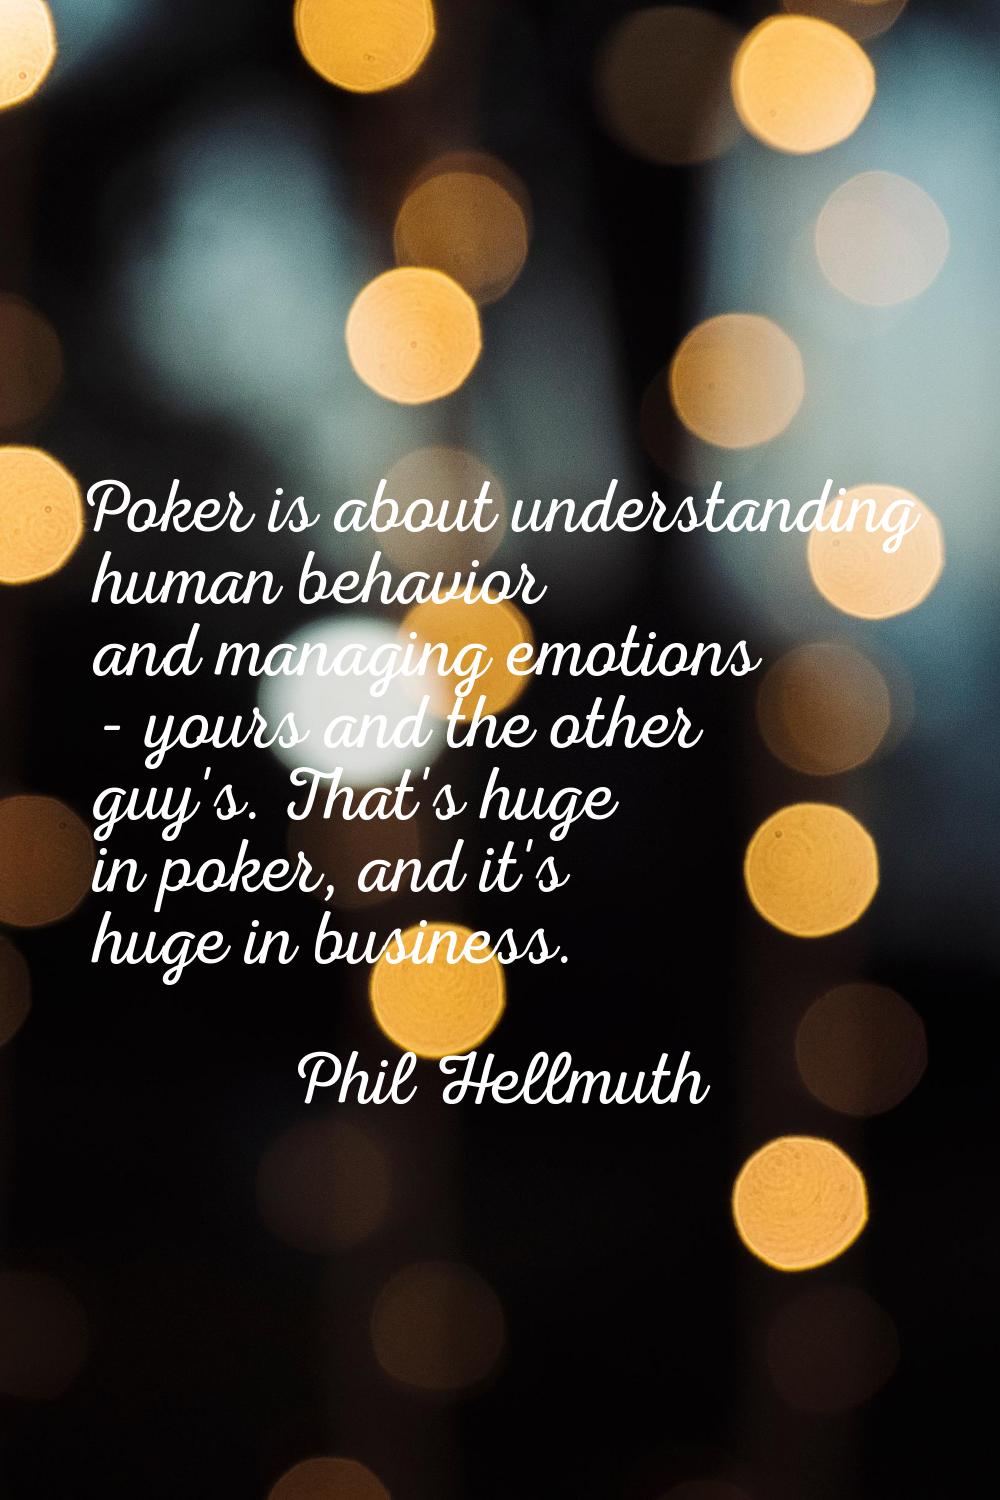 Poker is about understanding human behavior and managing emotions - yours and the other guy's. That